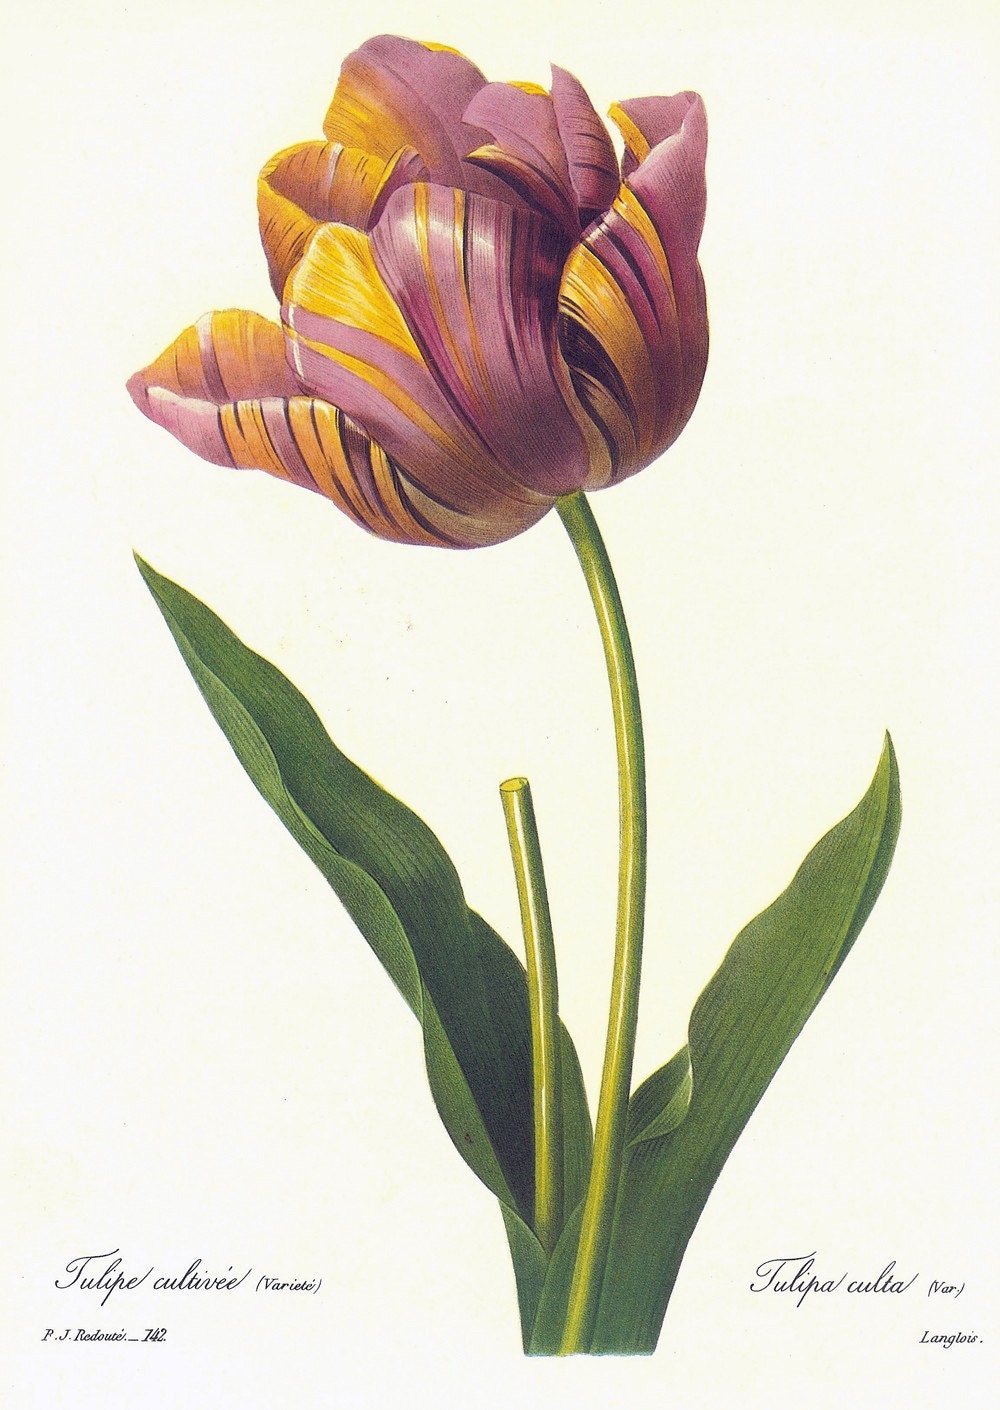 Vintage Botanical Print by Redoute of Tulip